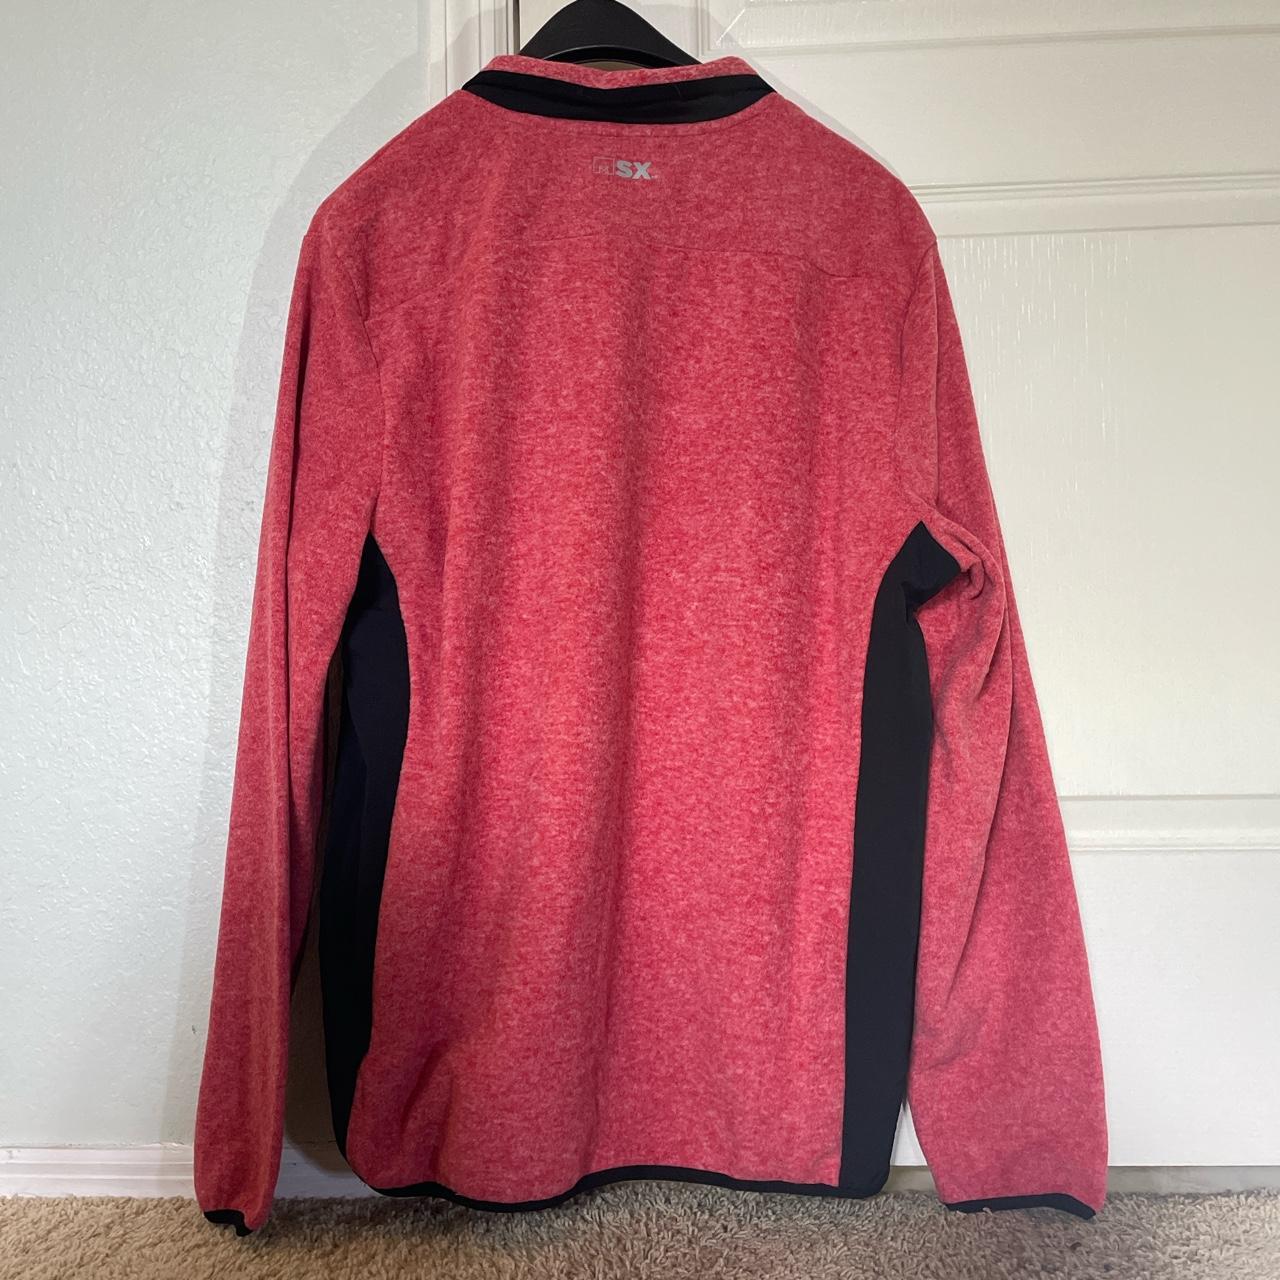 MSX by Michael Strahan Men's Red and Black Sweatshirt (3)